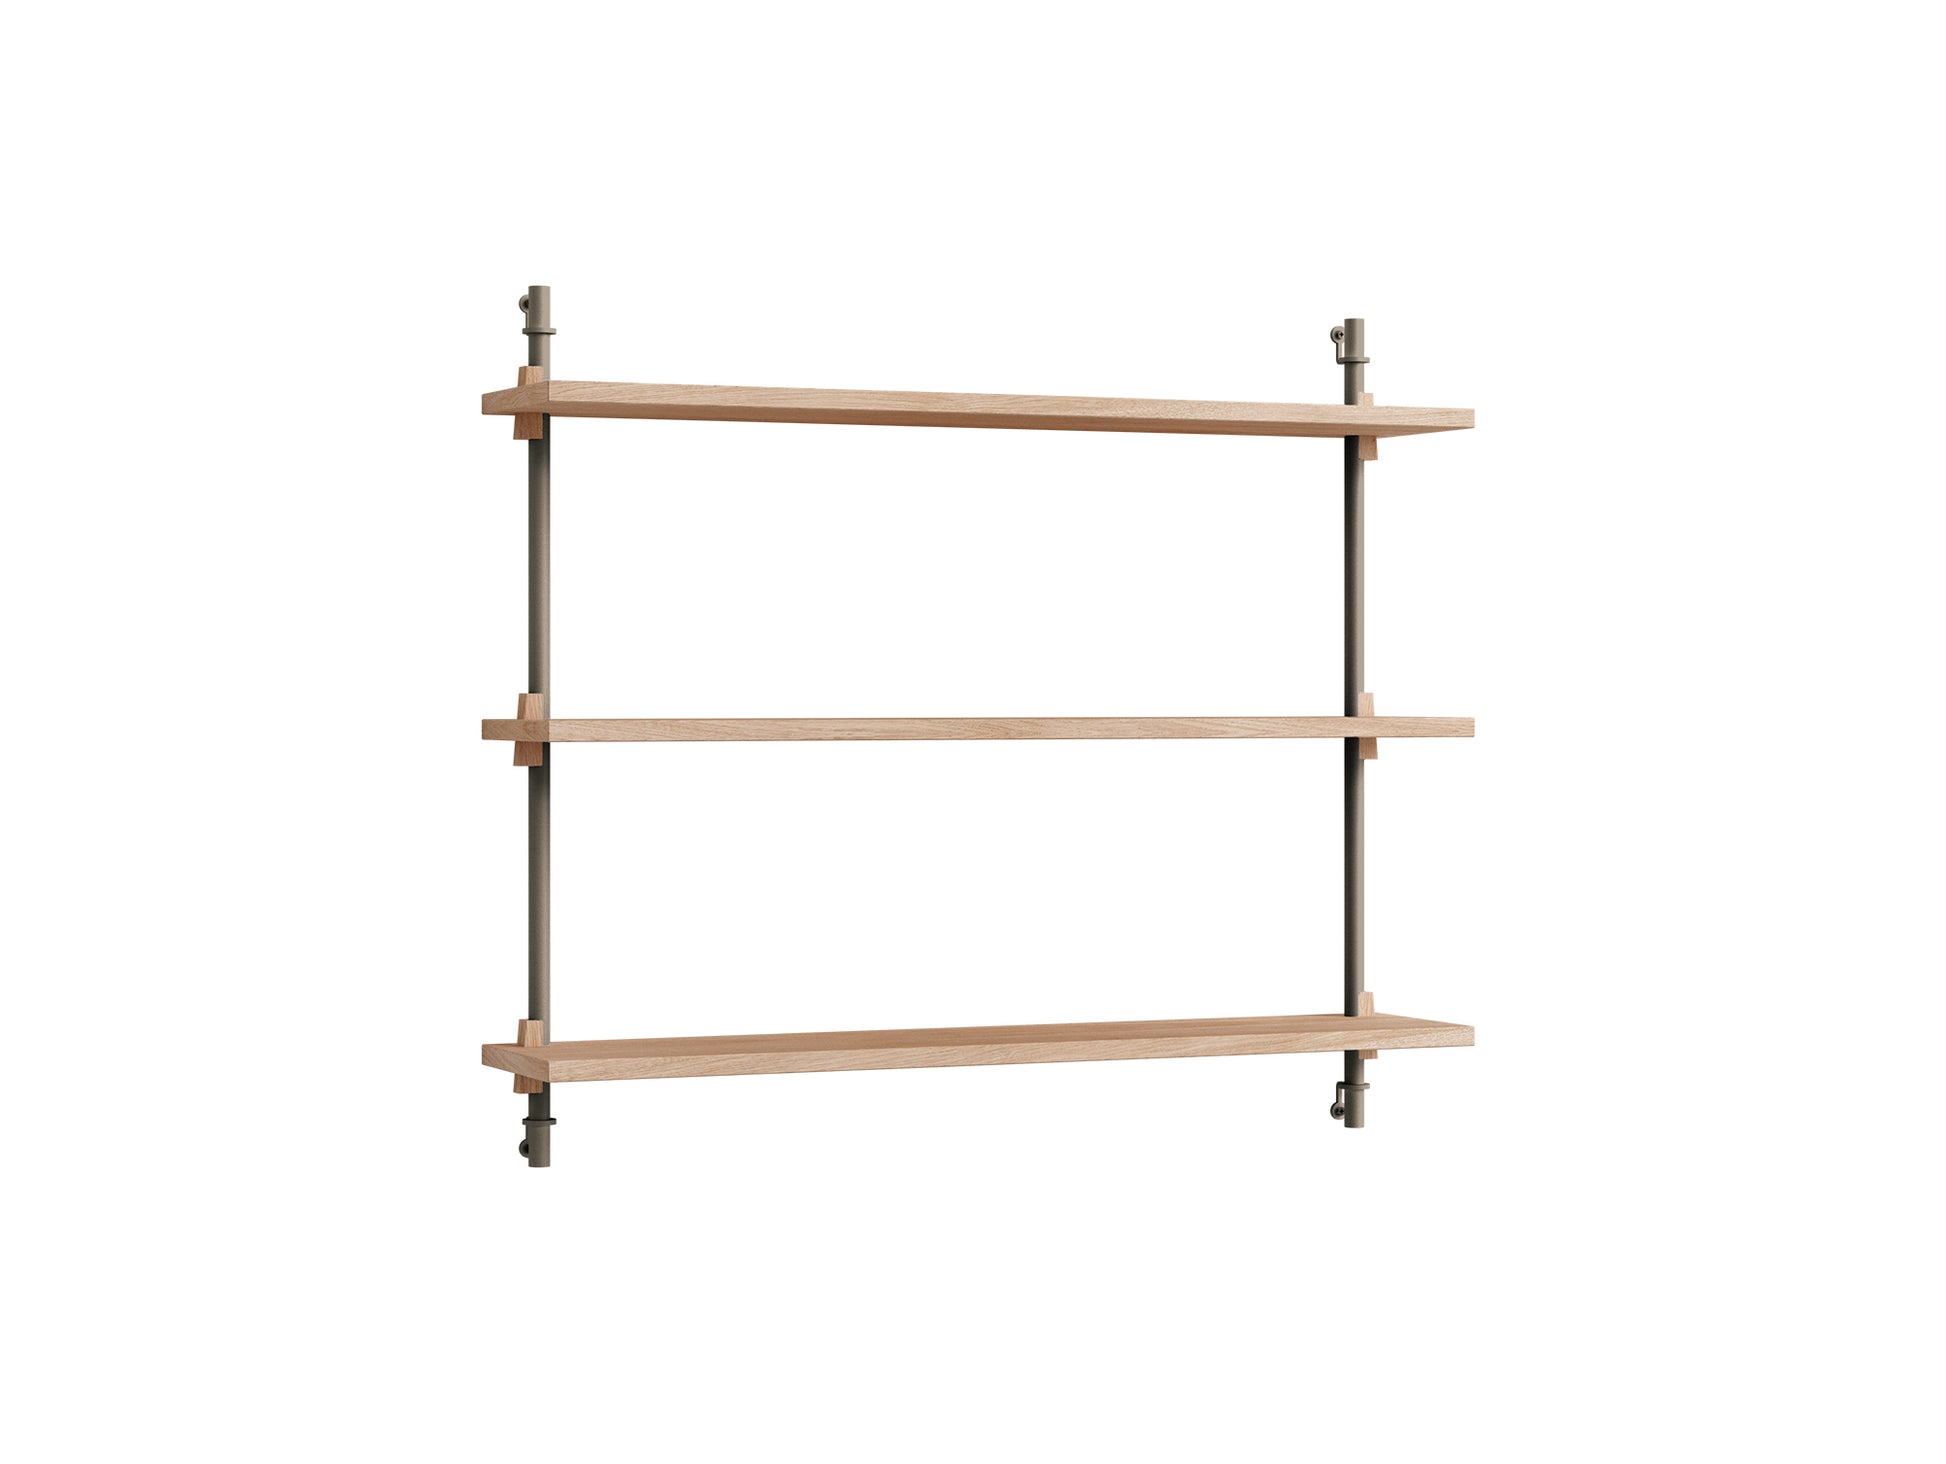 Wall Shelving System Sets 65.1 by Moebe - Warm Grey Uprights / Oiled Oak